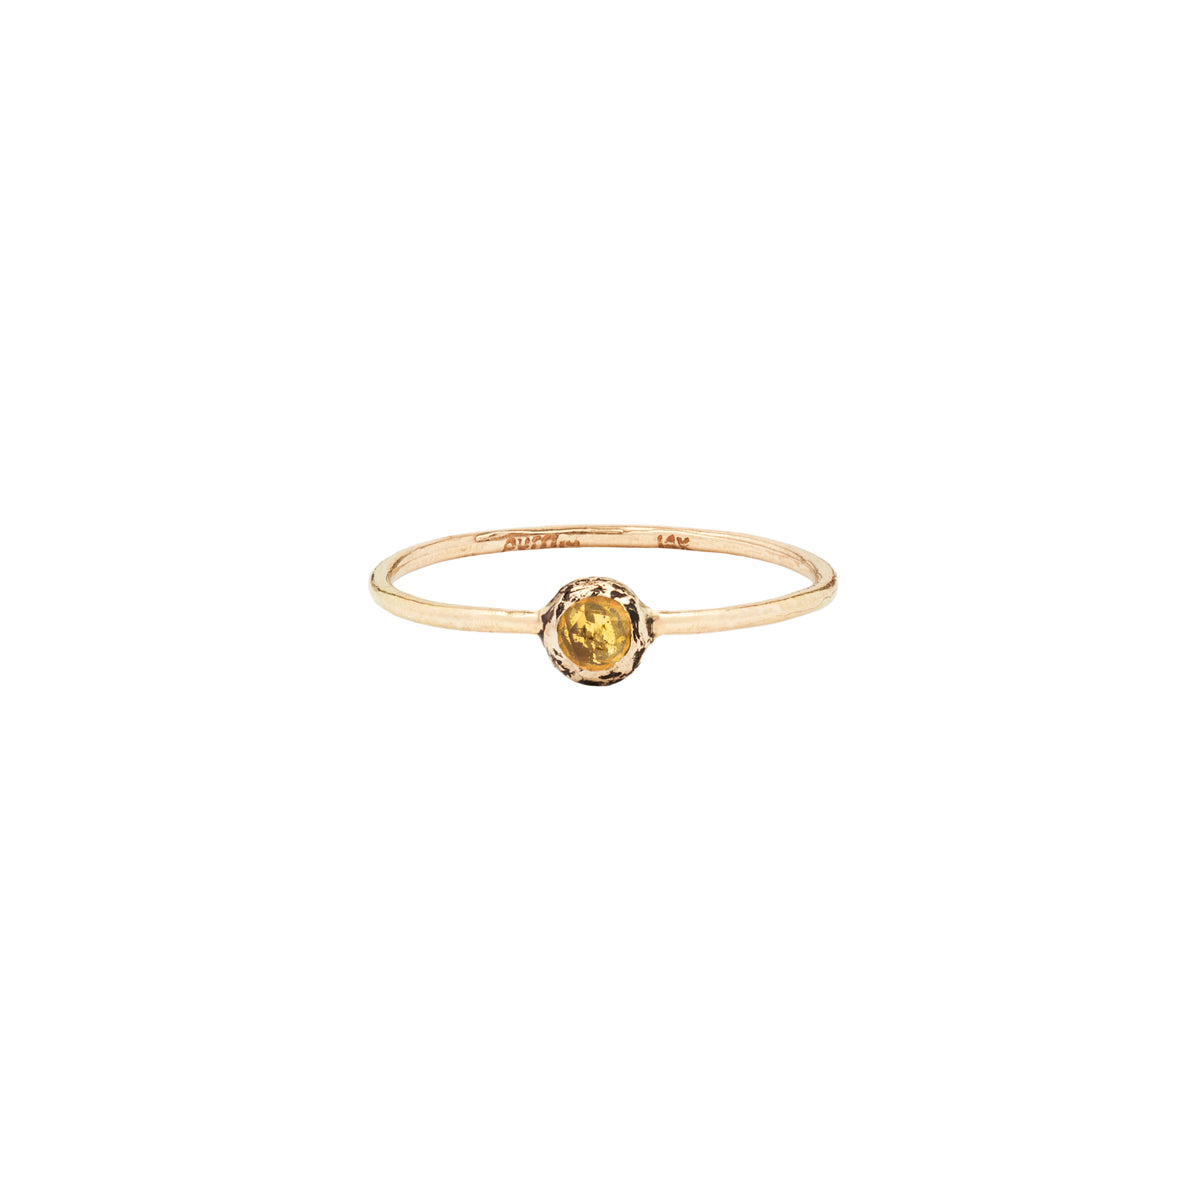 A 14k gold ring featuring a gold set yellow sapphire.